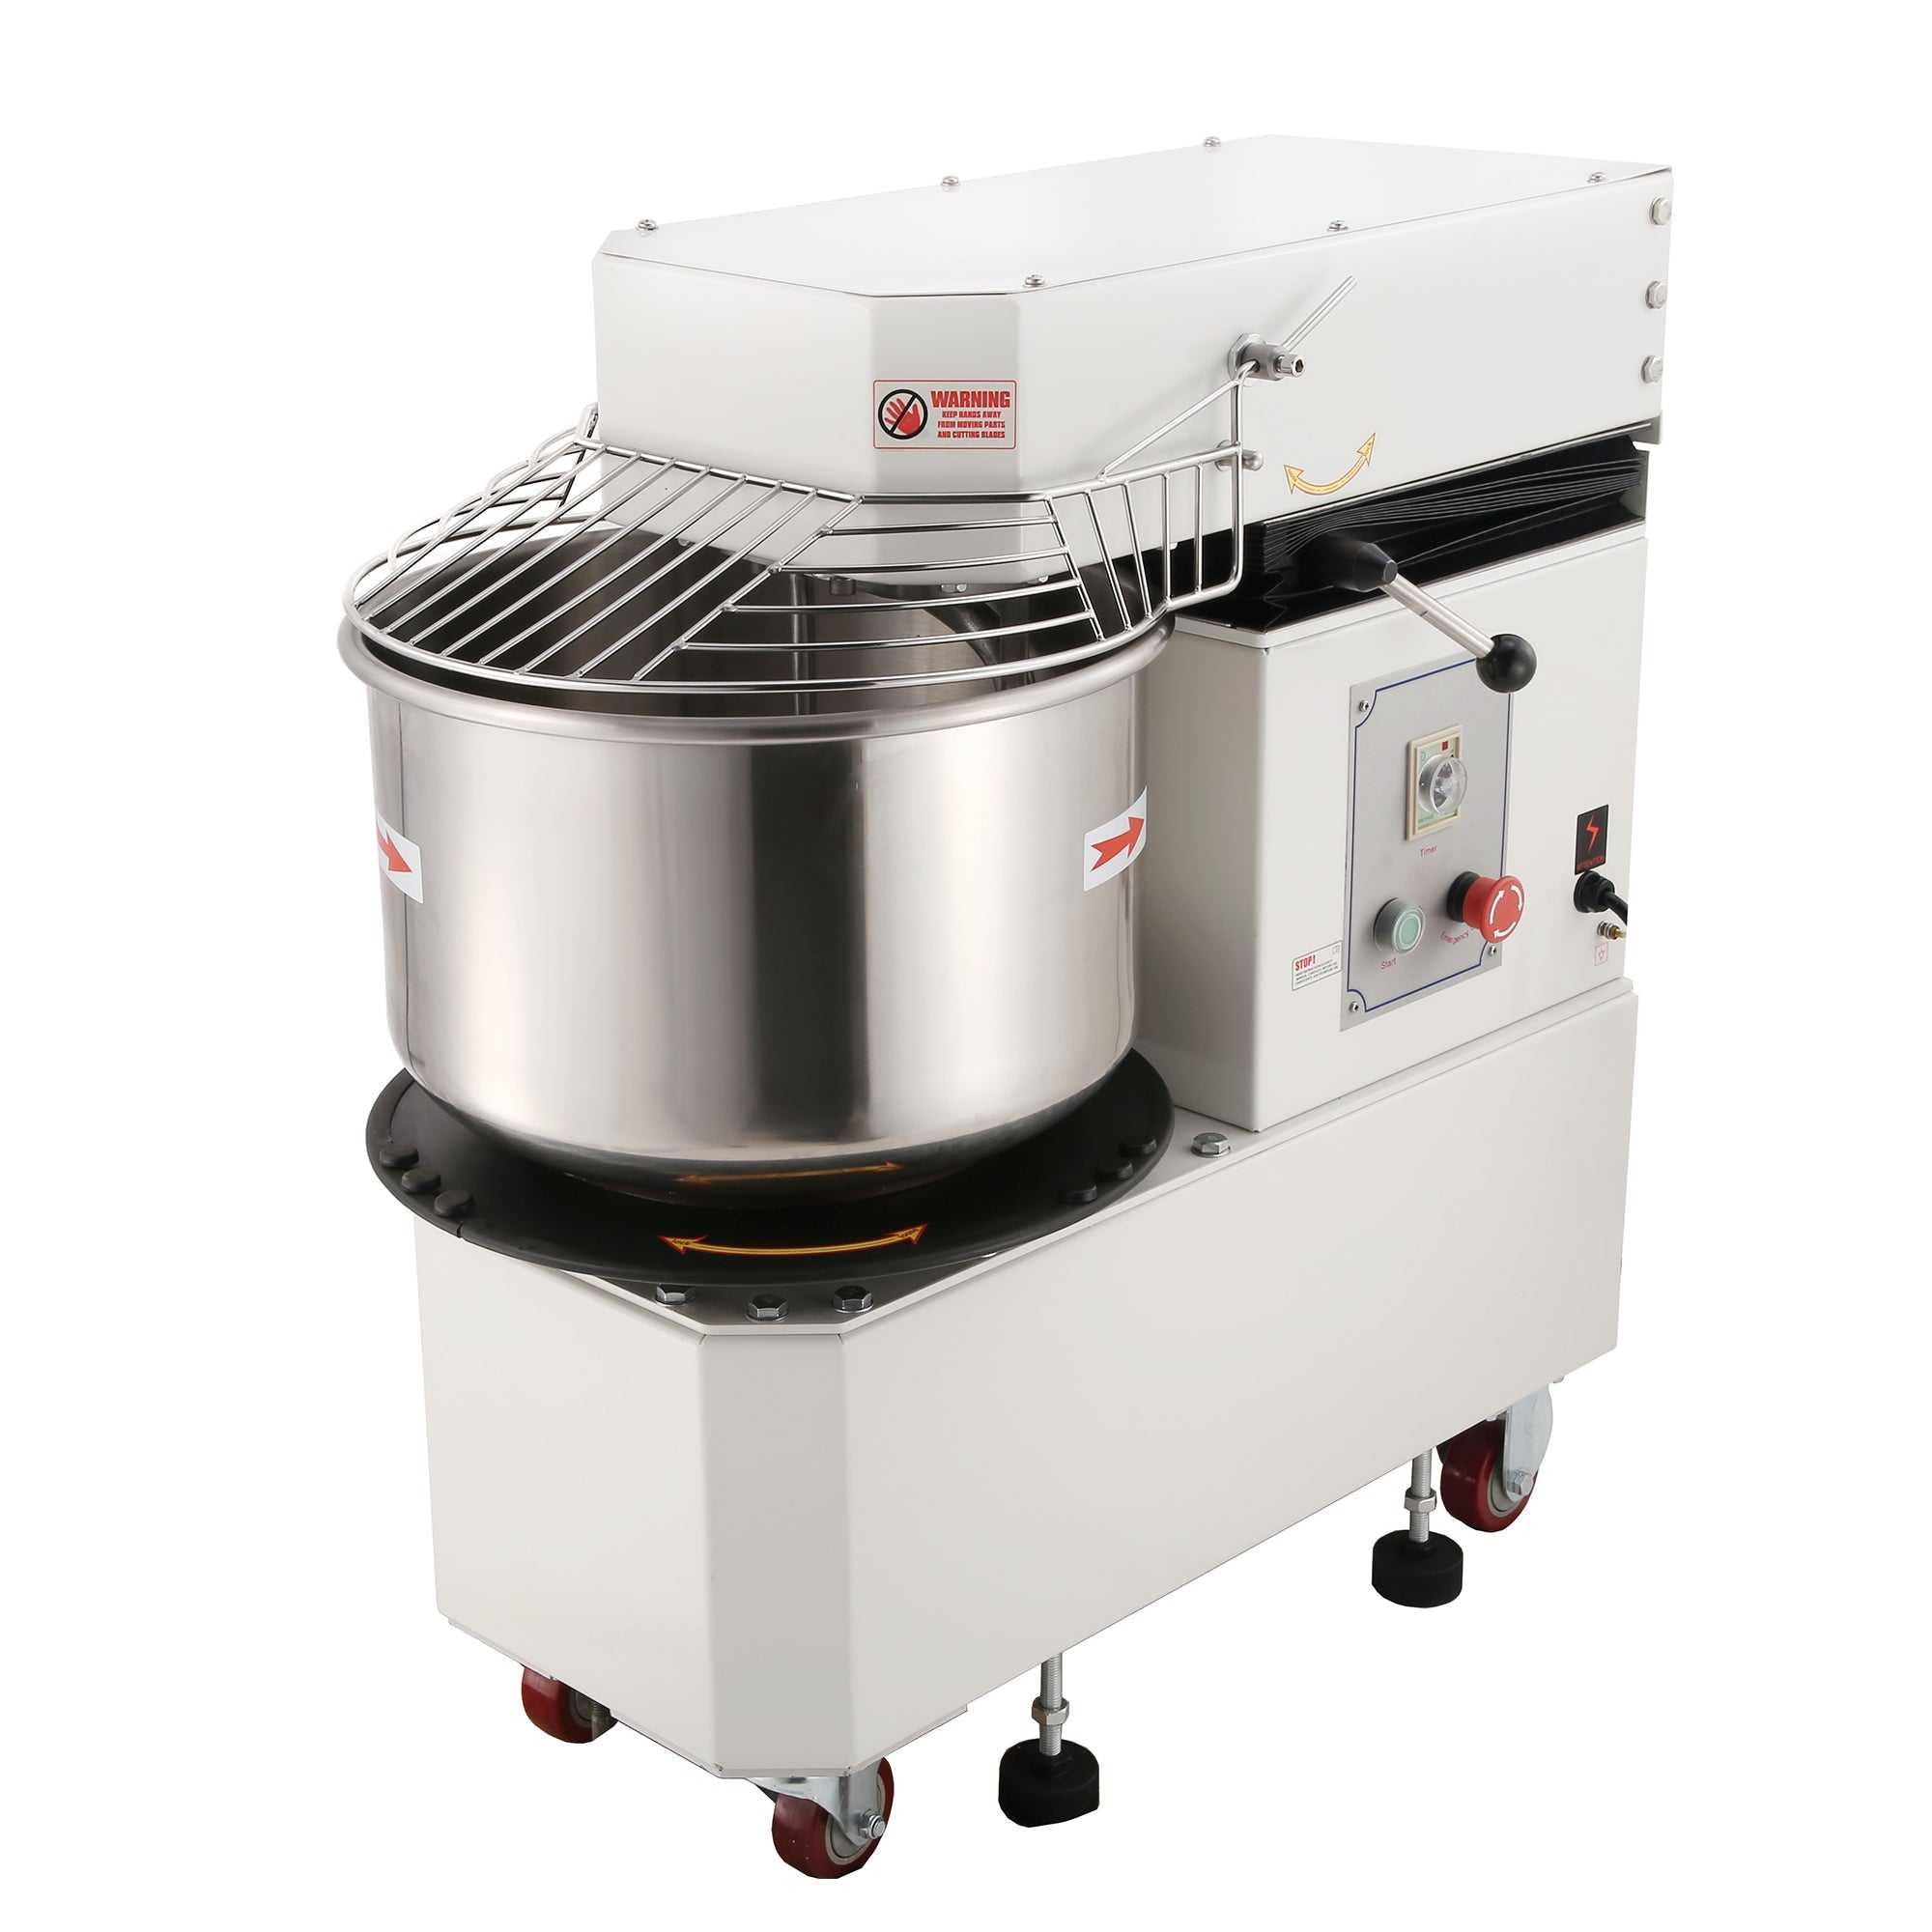 Hakka Commercial Dough Mixers 20 Quart Stainless Steel 2 Speed Rising Spiral Mixers-HTD20 (240V/50Hz,1 Phase)